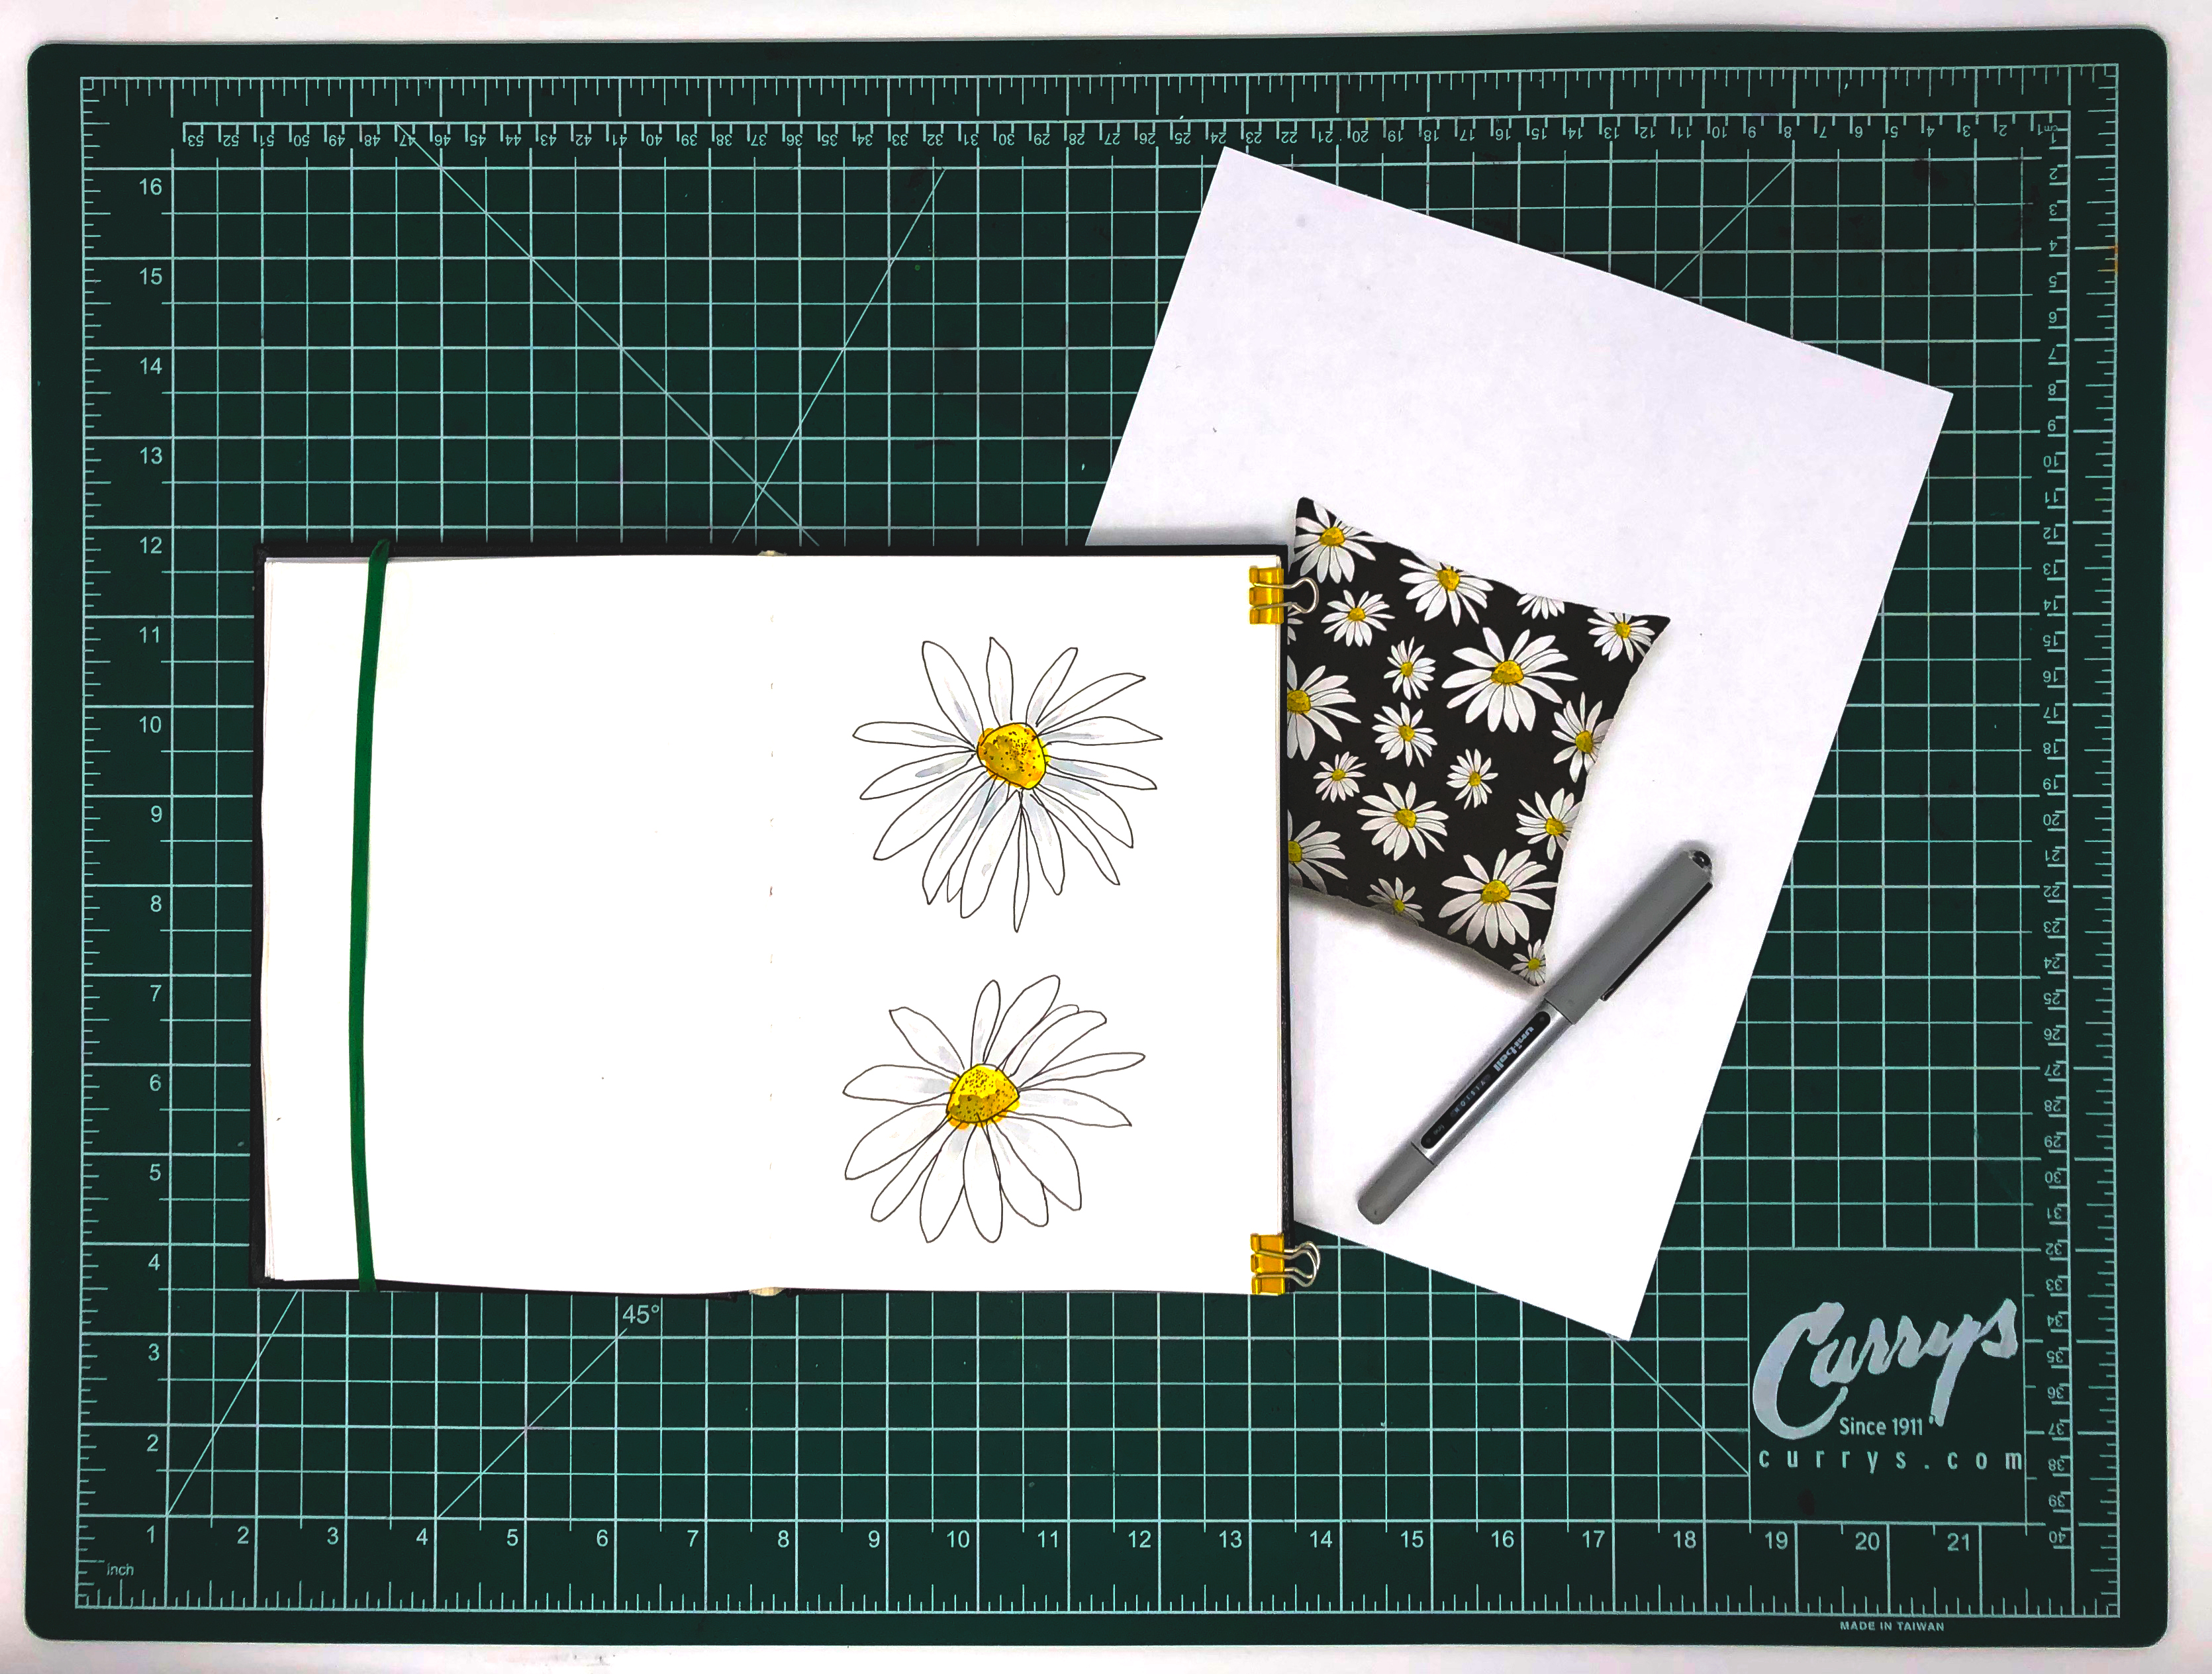 Preview of Spring Designs at PenJarProductions.com: Daisy drawings